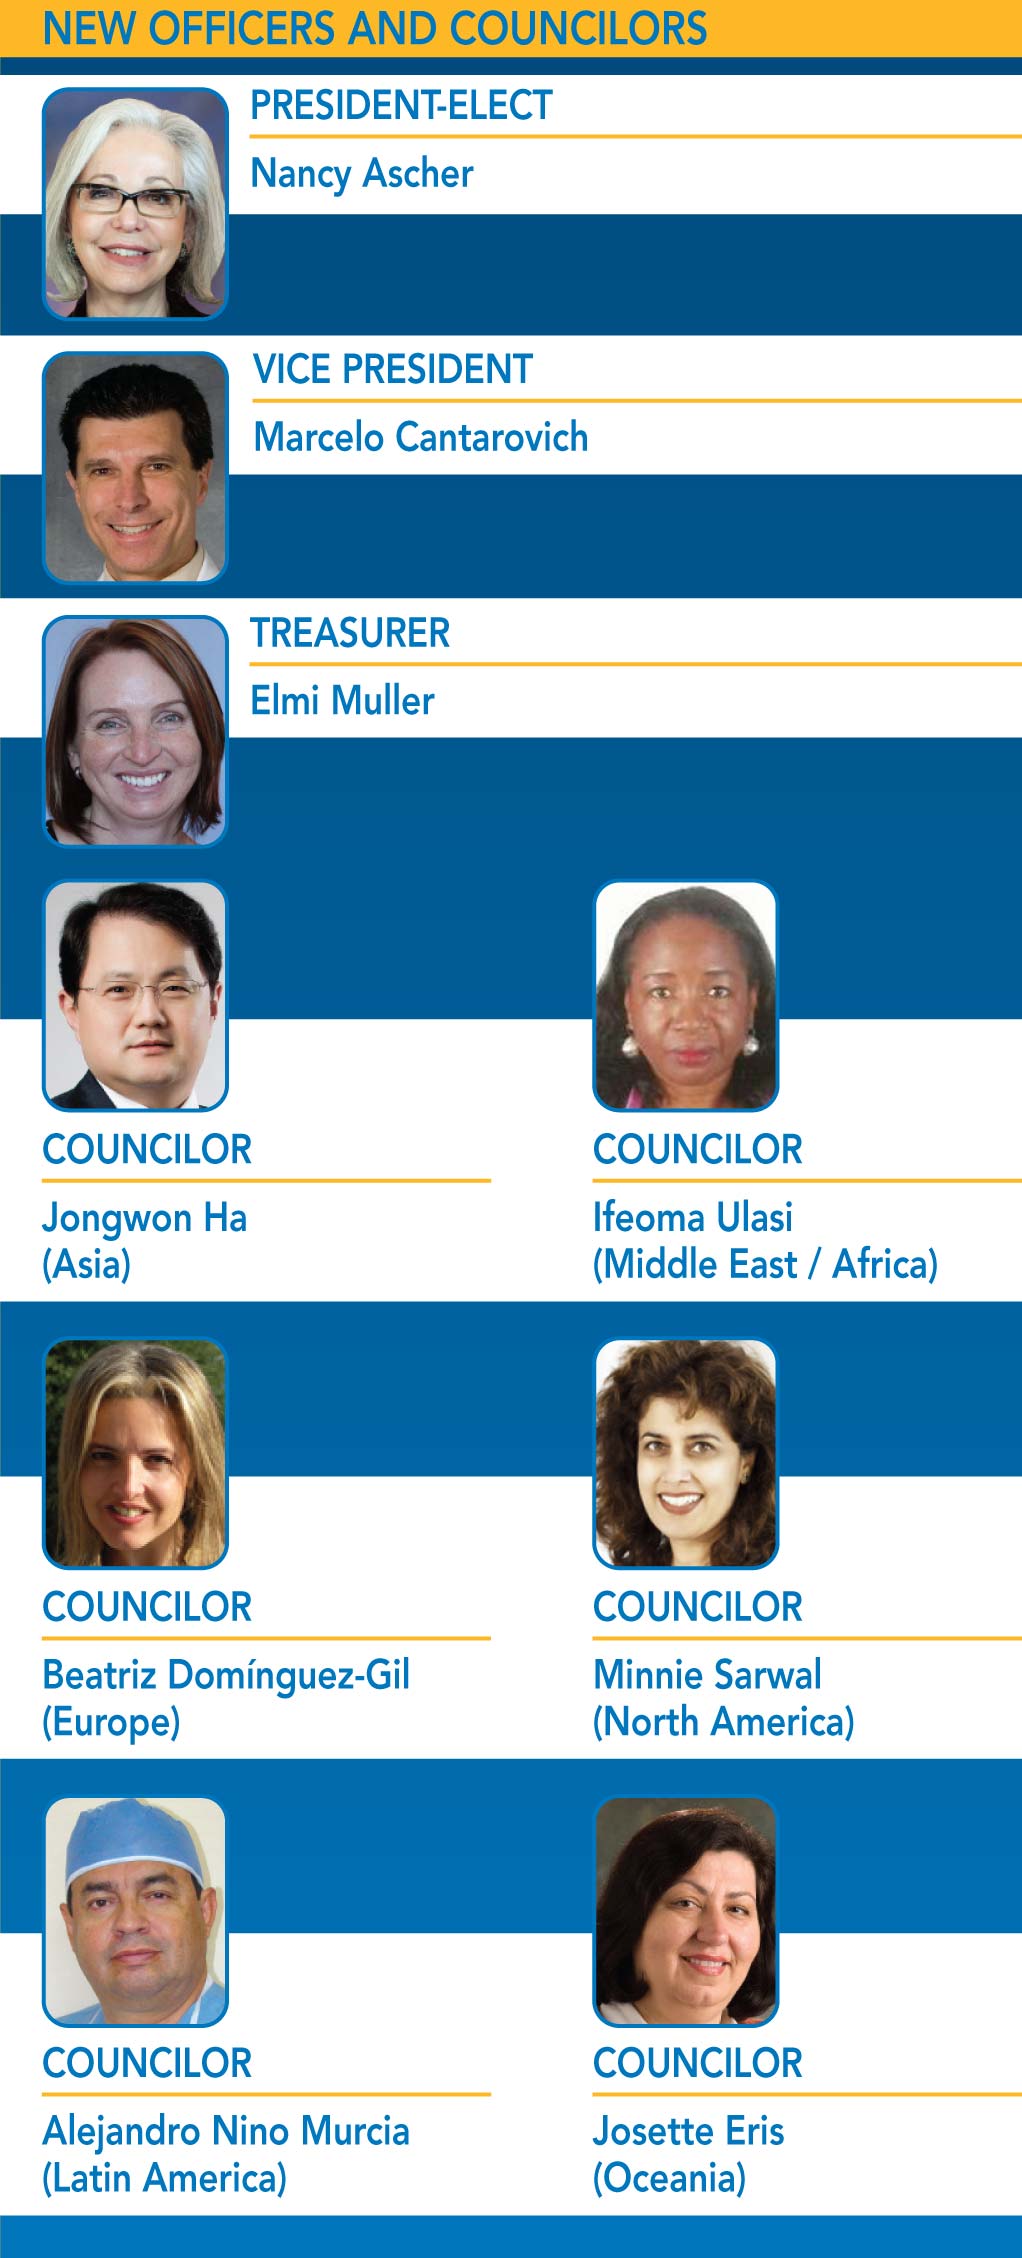 NEW COUNCIL POSITIONS FOR 2014–2016